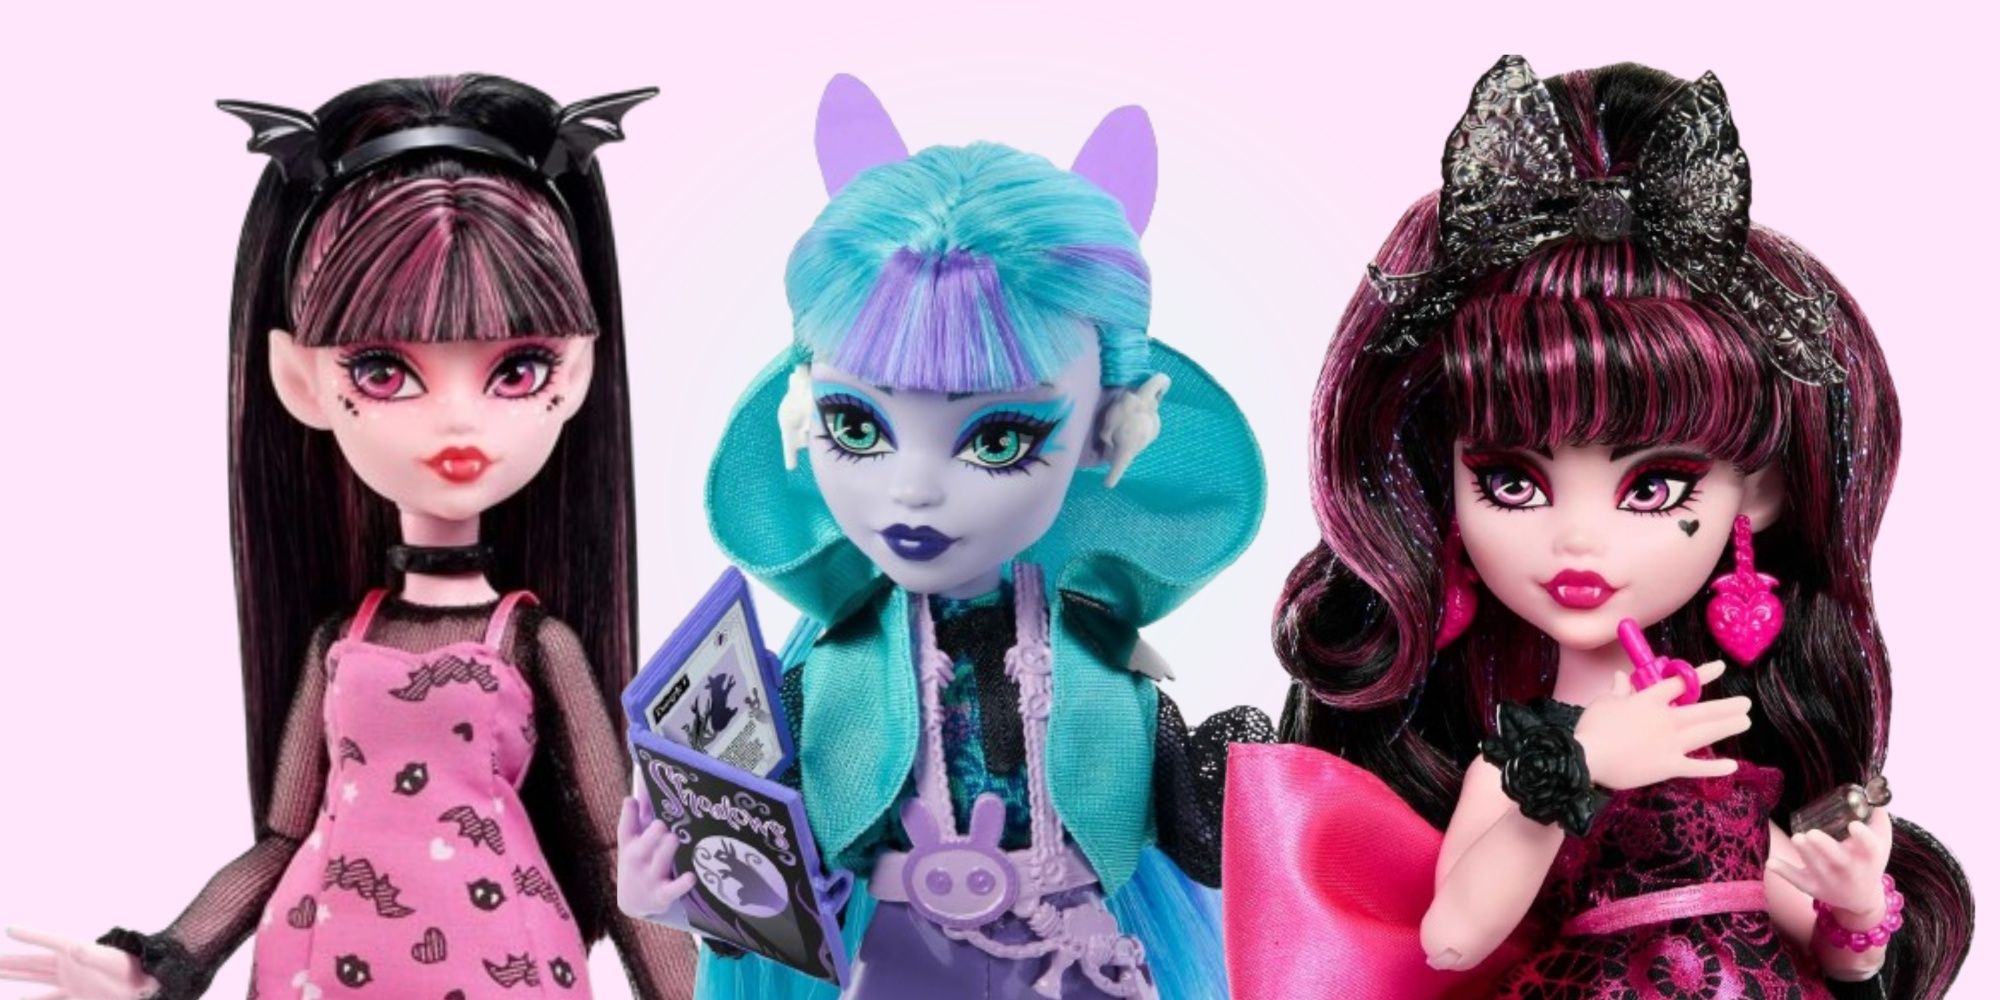 Three Monster High Dolls on a gradient background